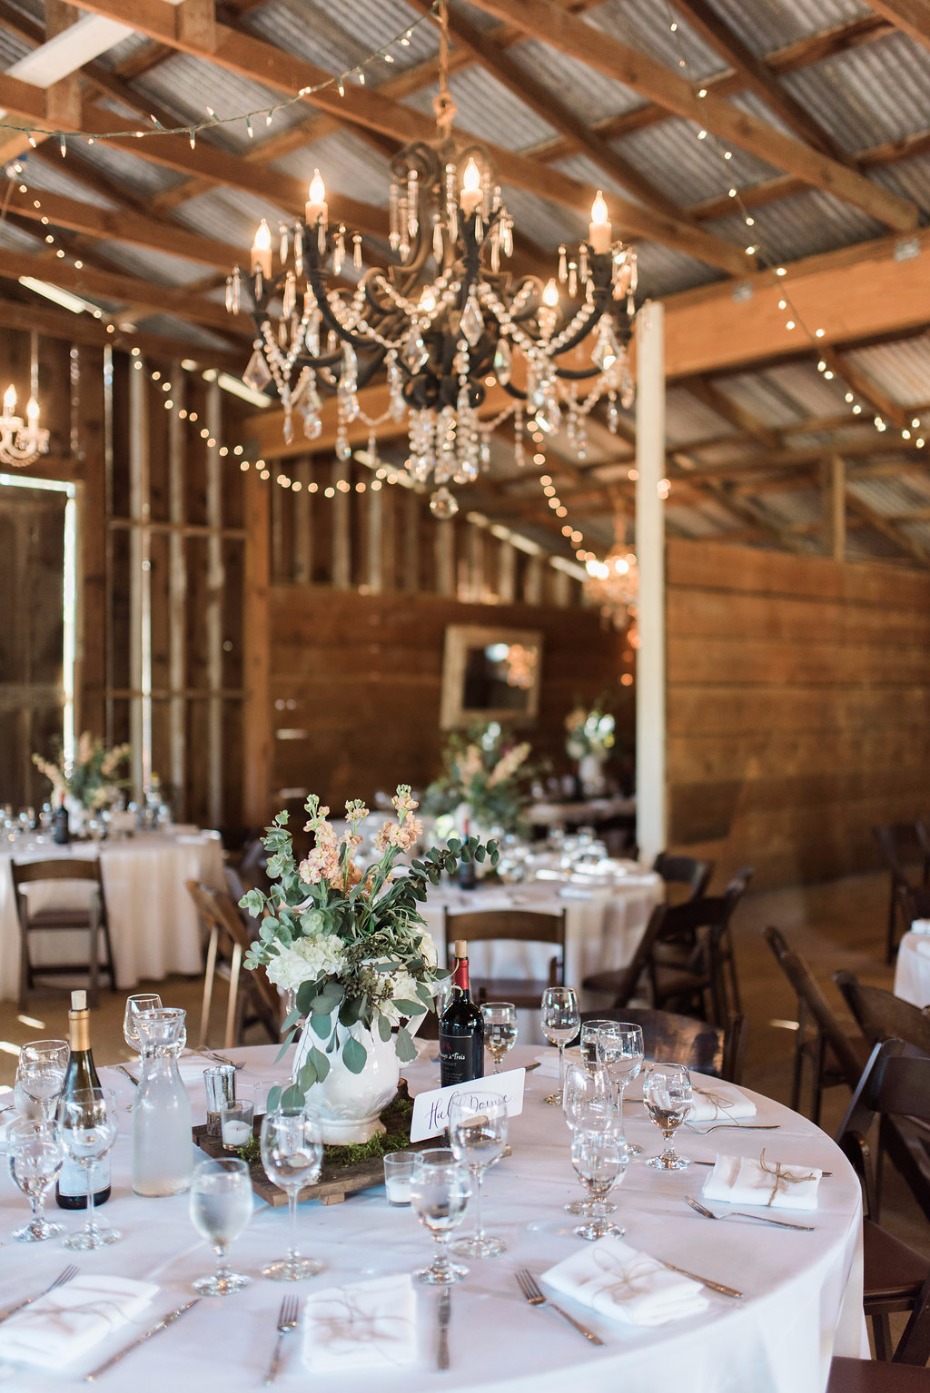 Dreamy barn venue with chandeliers